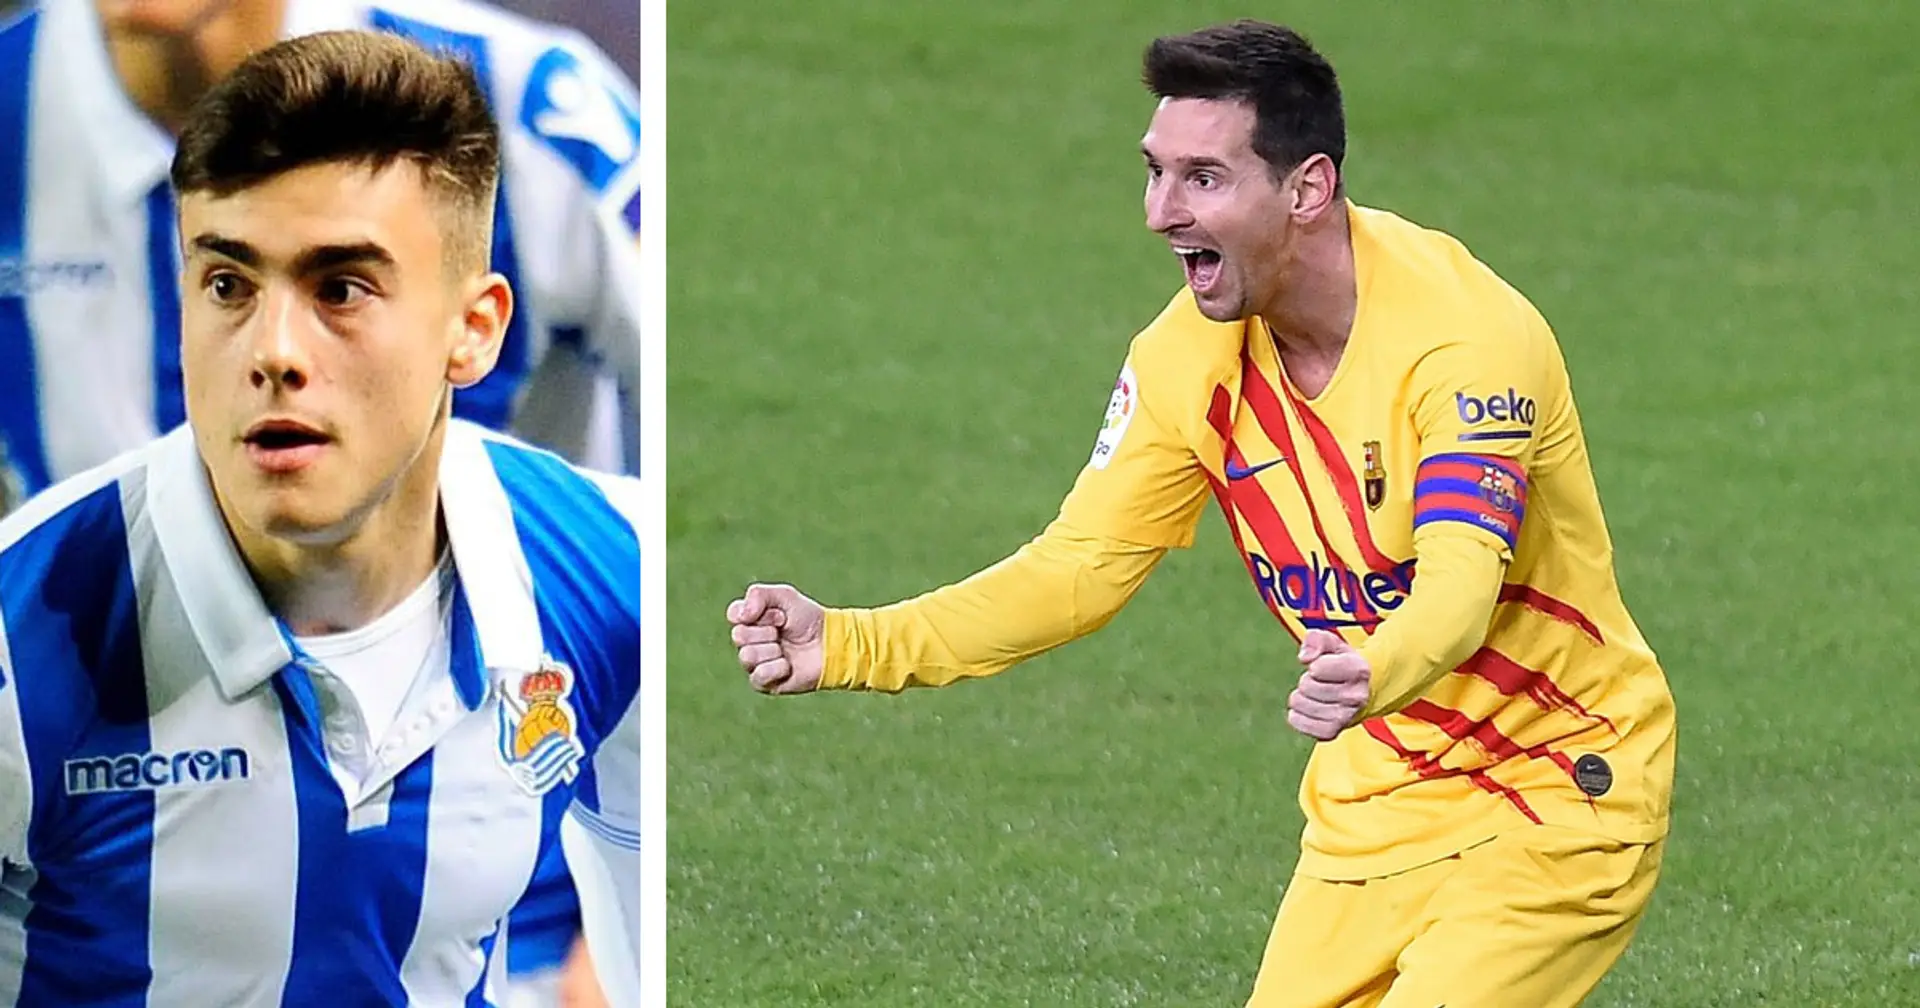 'I think it's a joke that they say Messi is finished, it's absurd': Real Sociedad's forward Barrenetxea